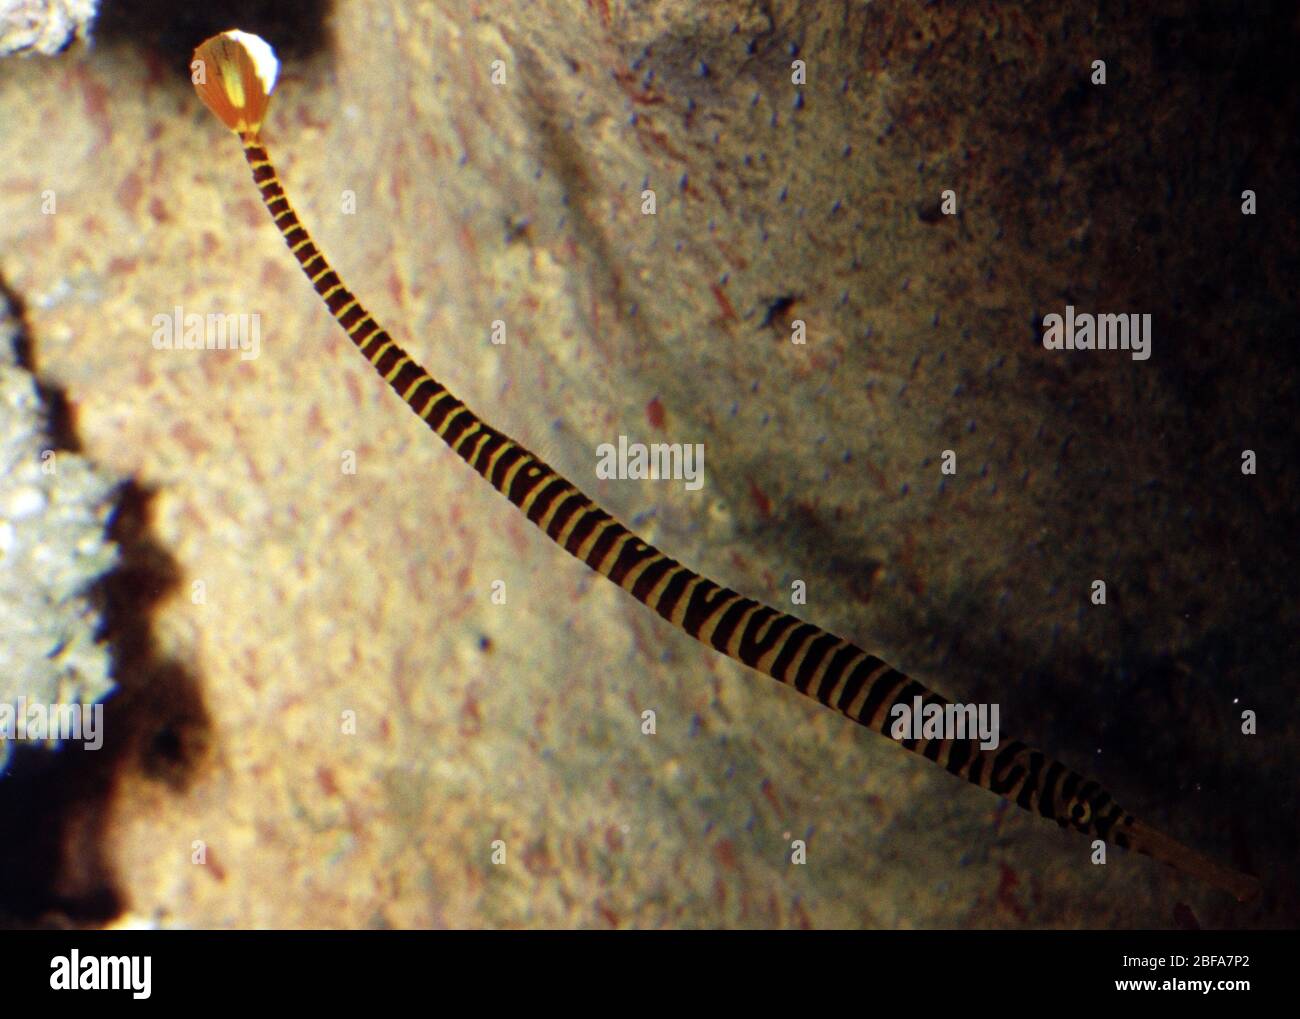 Coral Banded Pipefish High Resolution Stock Photography And Images Alamy